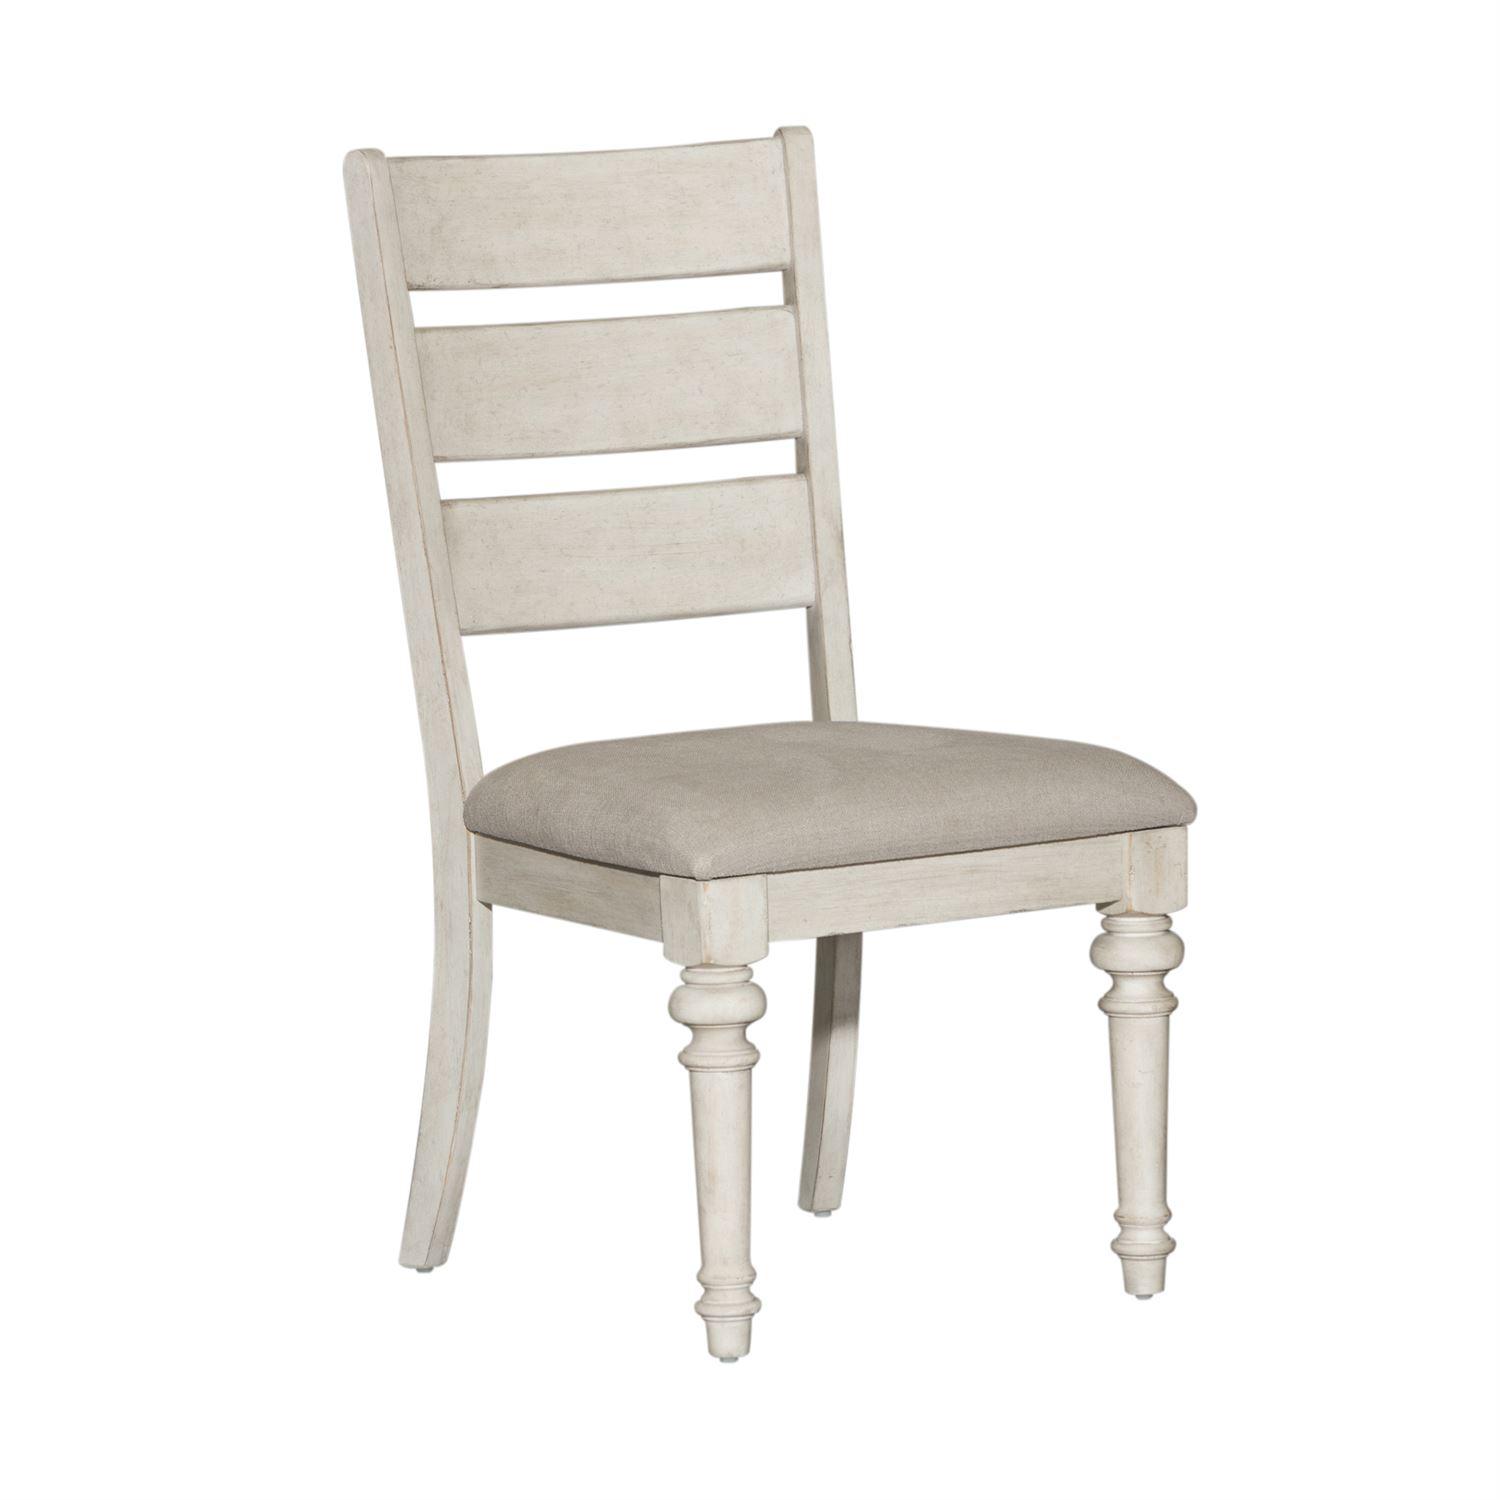 Farmhouse Dining Side Chair Heartland  (824-DR) Dining Side Chair 824-C2001S in White 